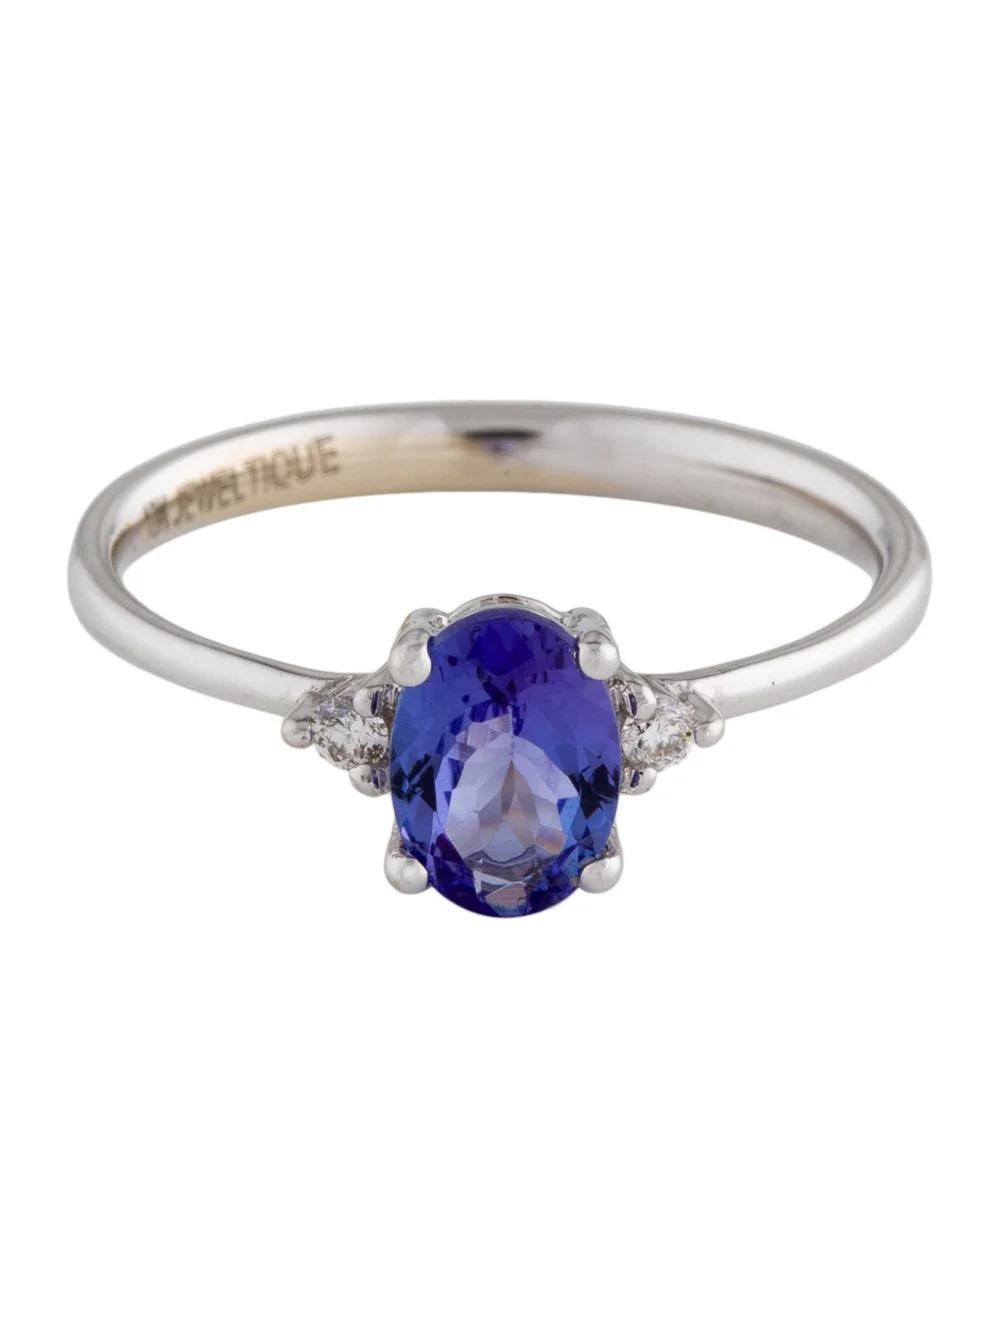 Oval Cut 18K Tanzanite & Diamond Cocktail Ring - Size 6.75 - Stunning Design, Timeless For Sale